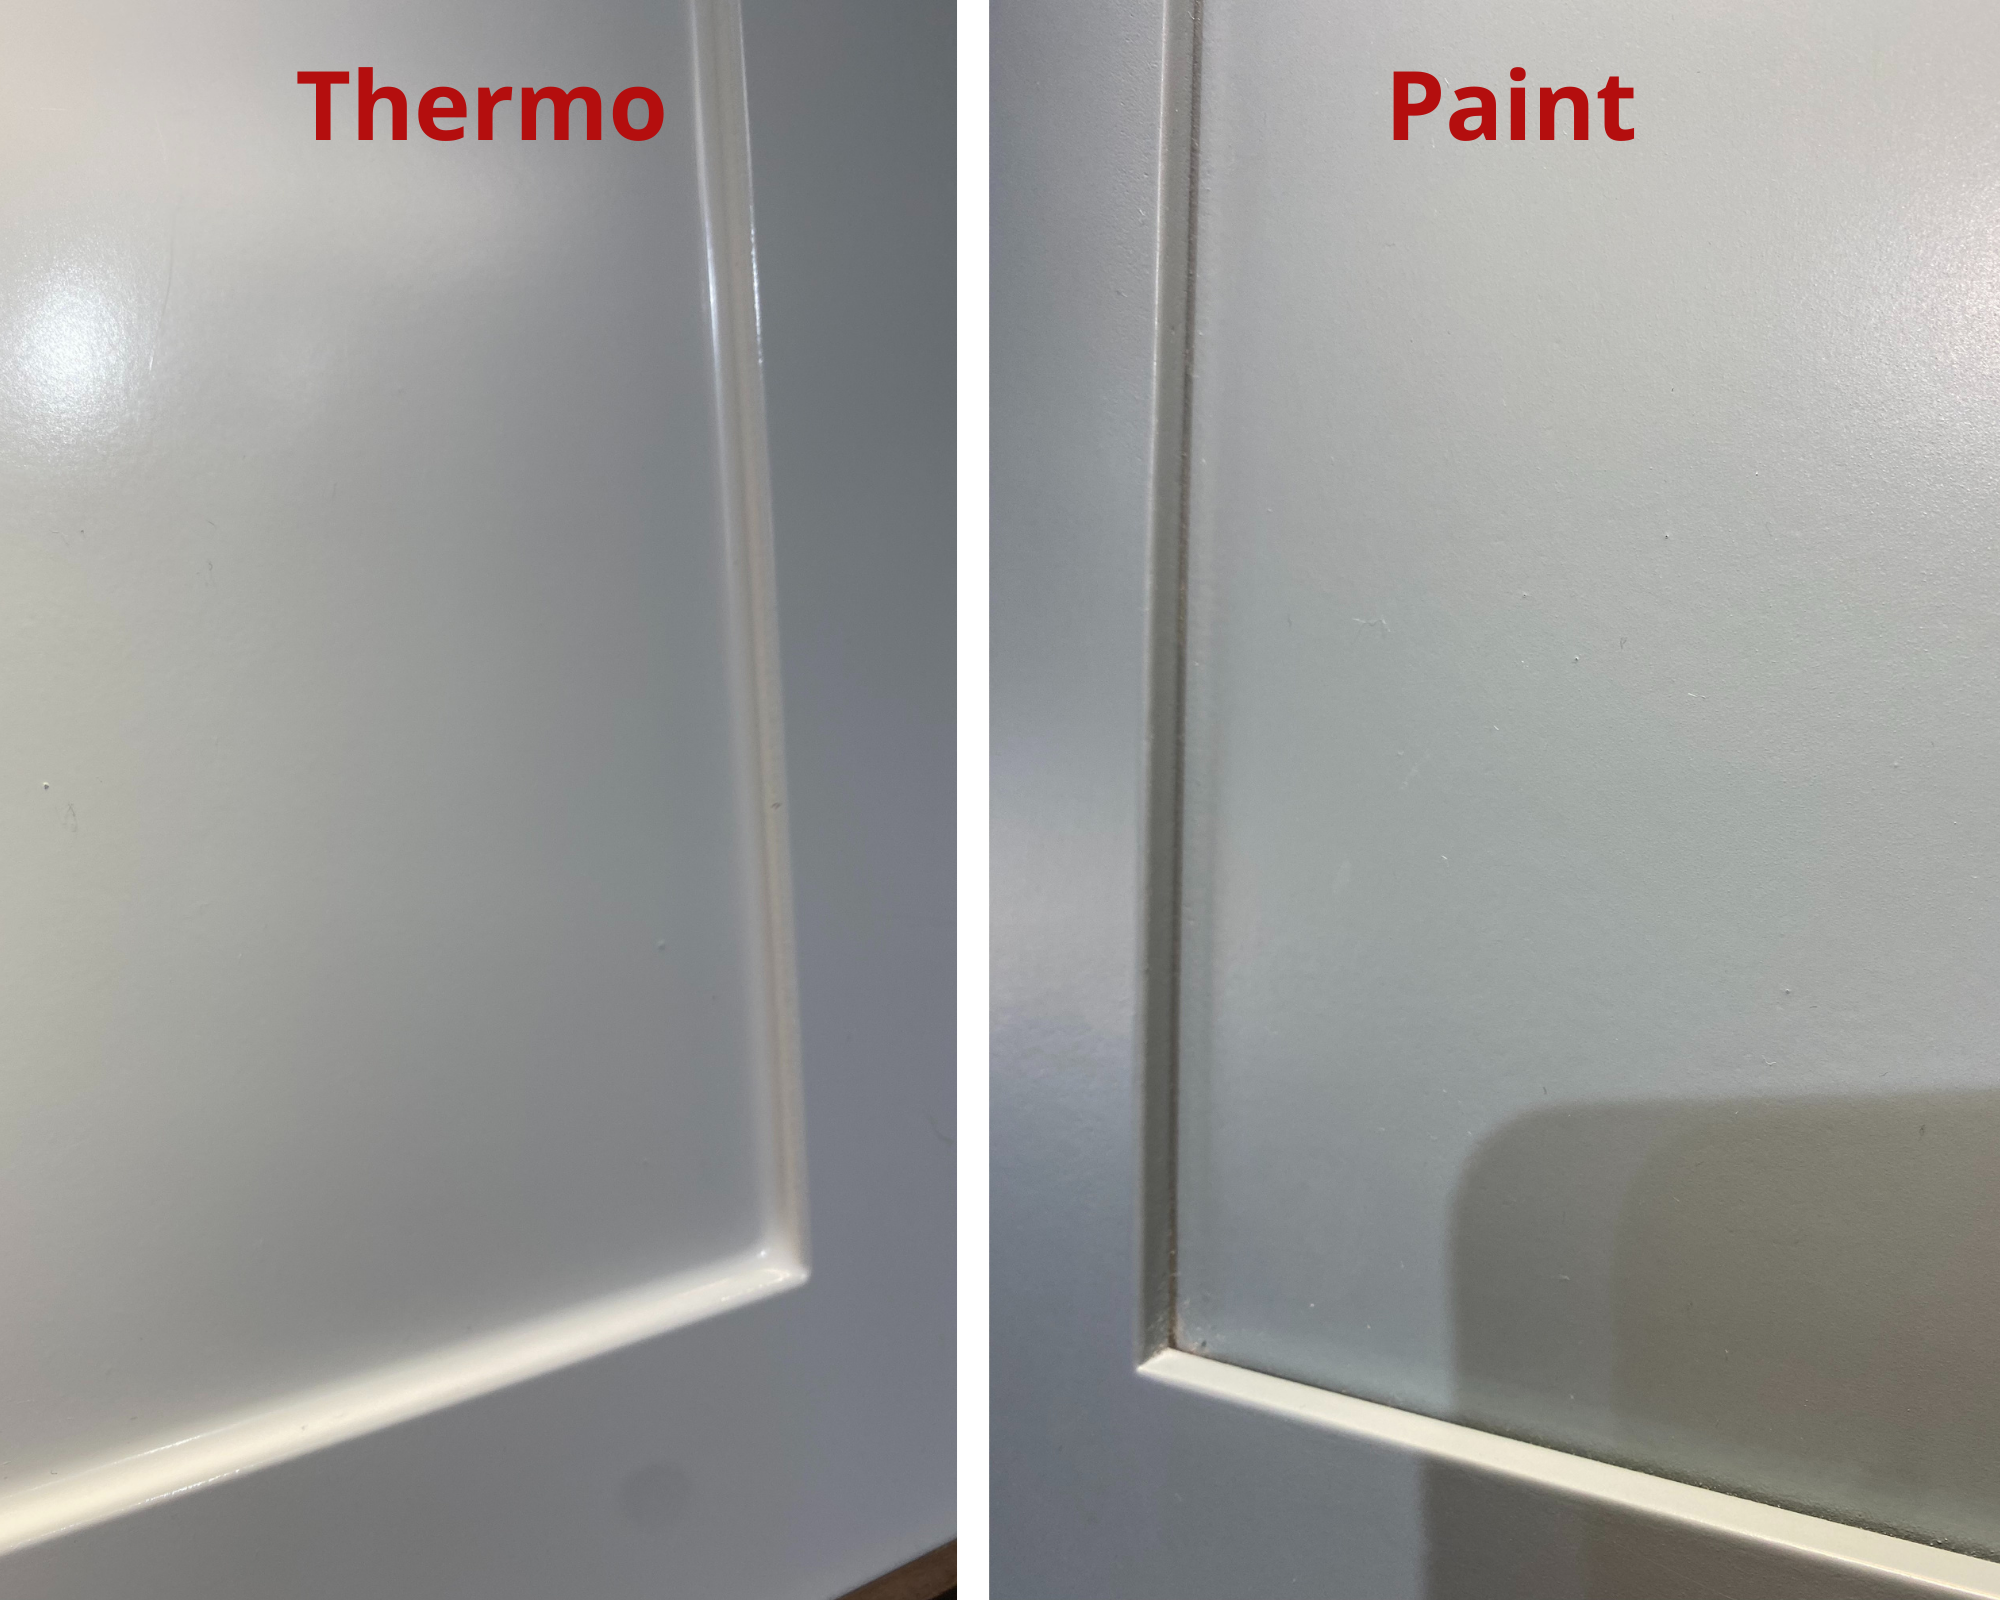 Thermofoil vs. Paint: Which is Better for Kitchen Cabinets?